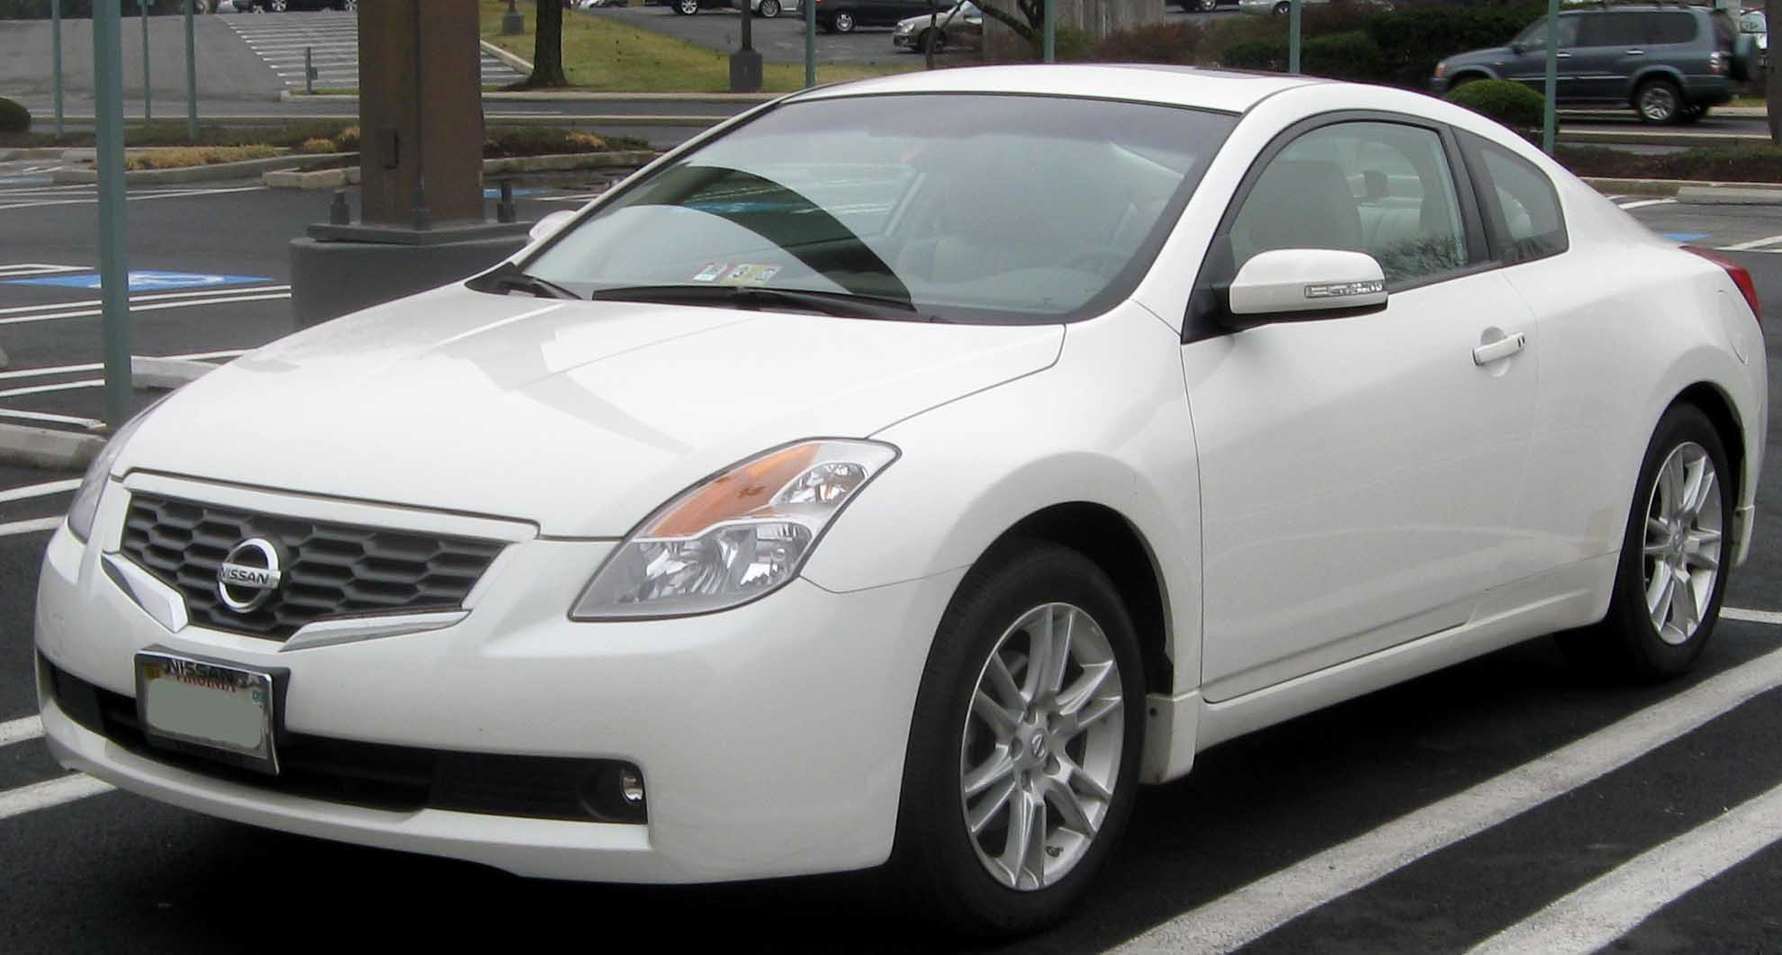 Nissan Altima Coupe #8661080